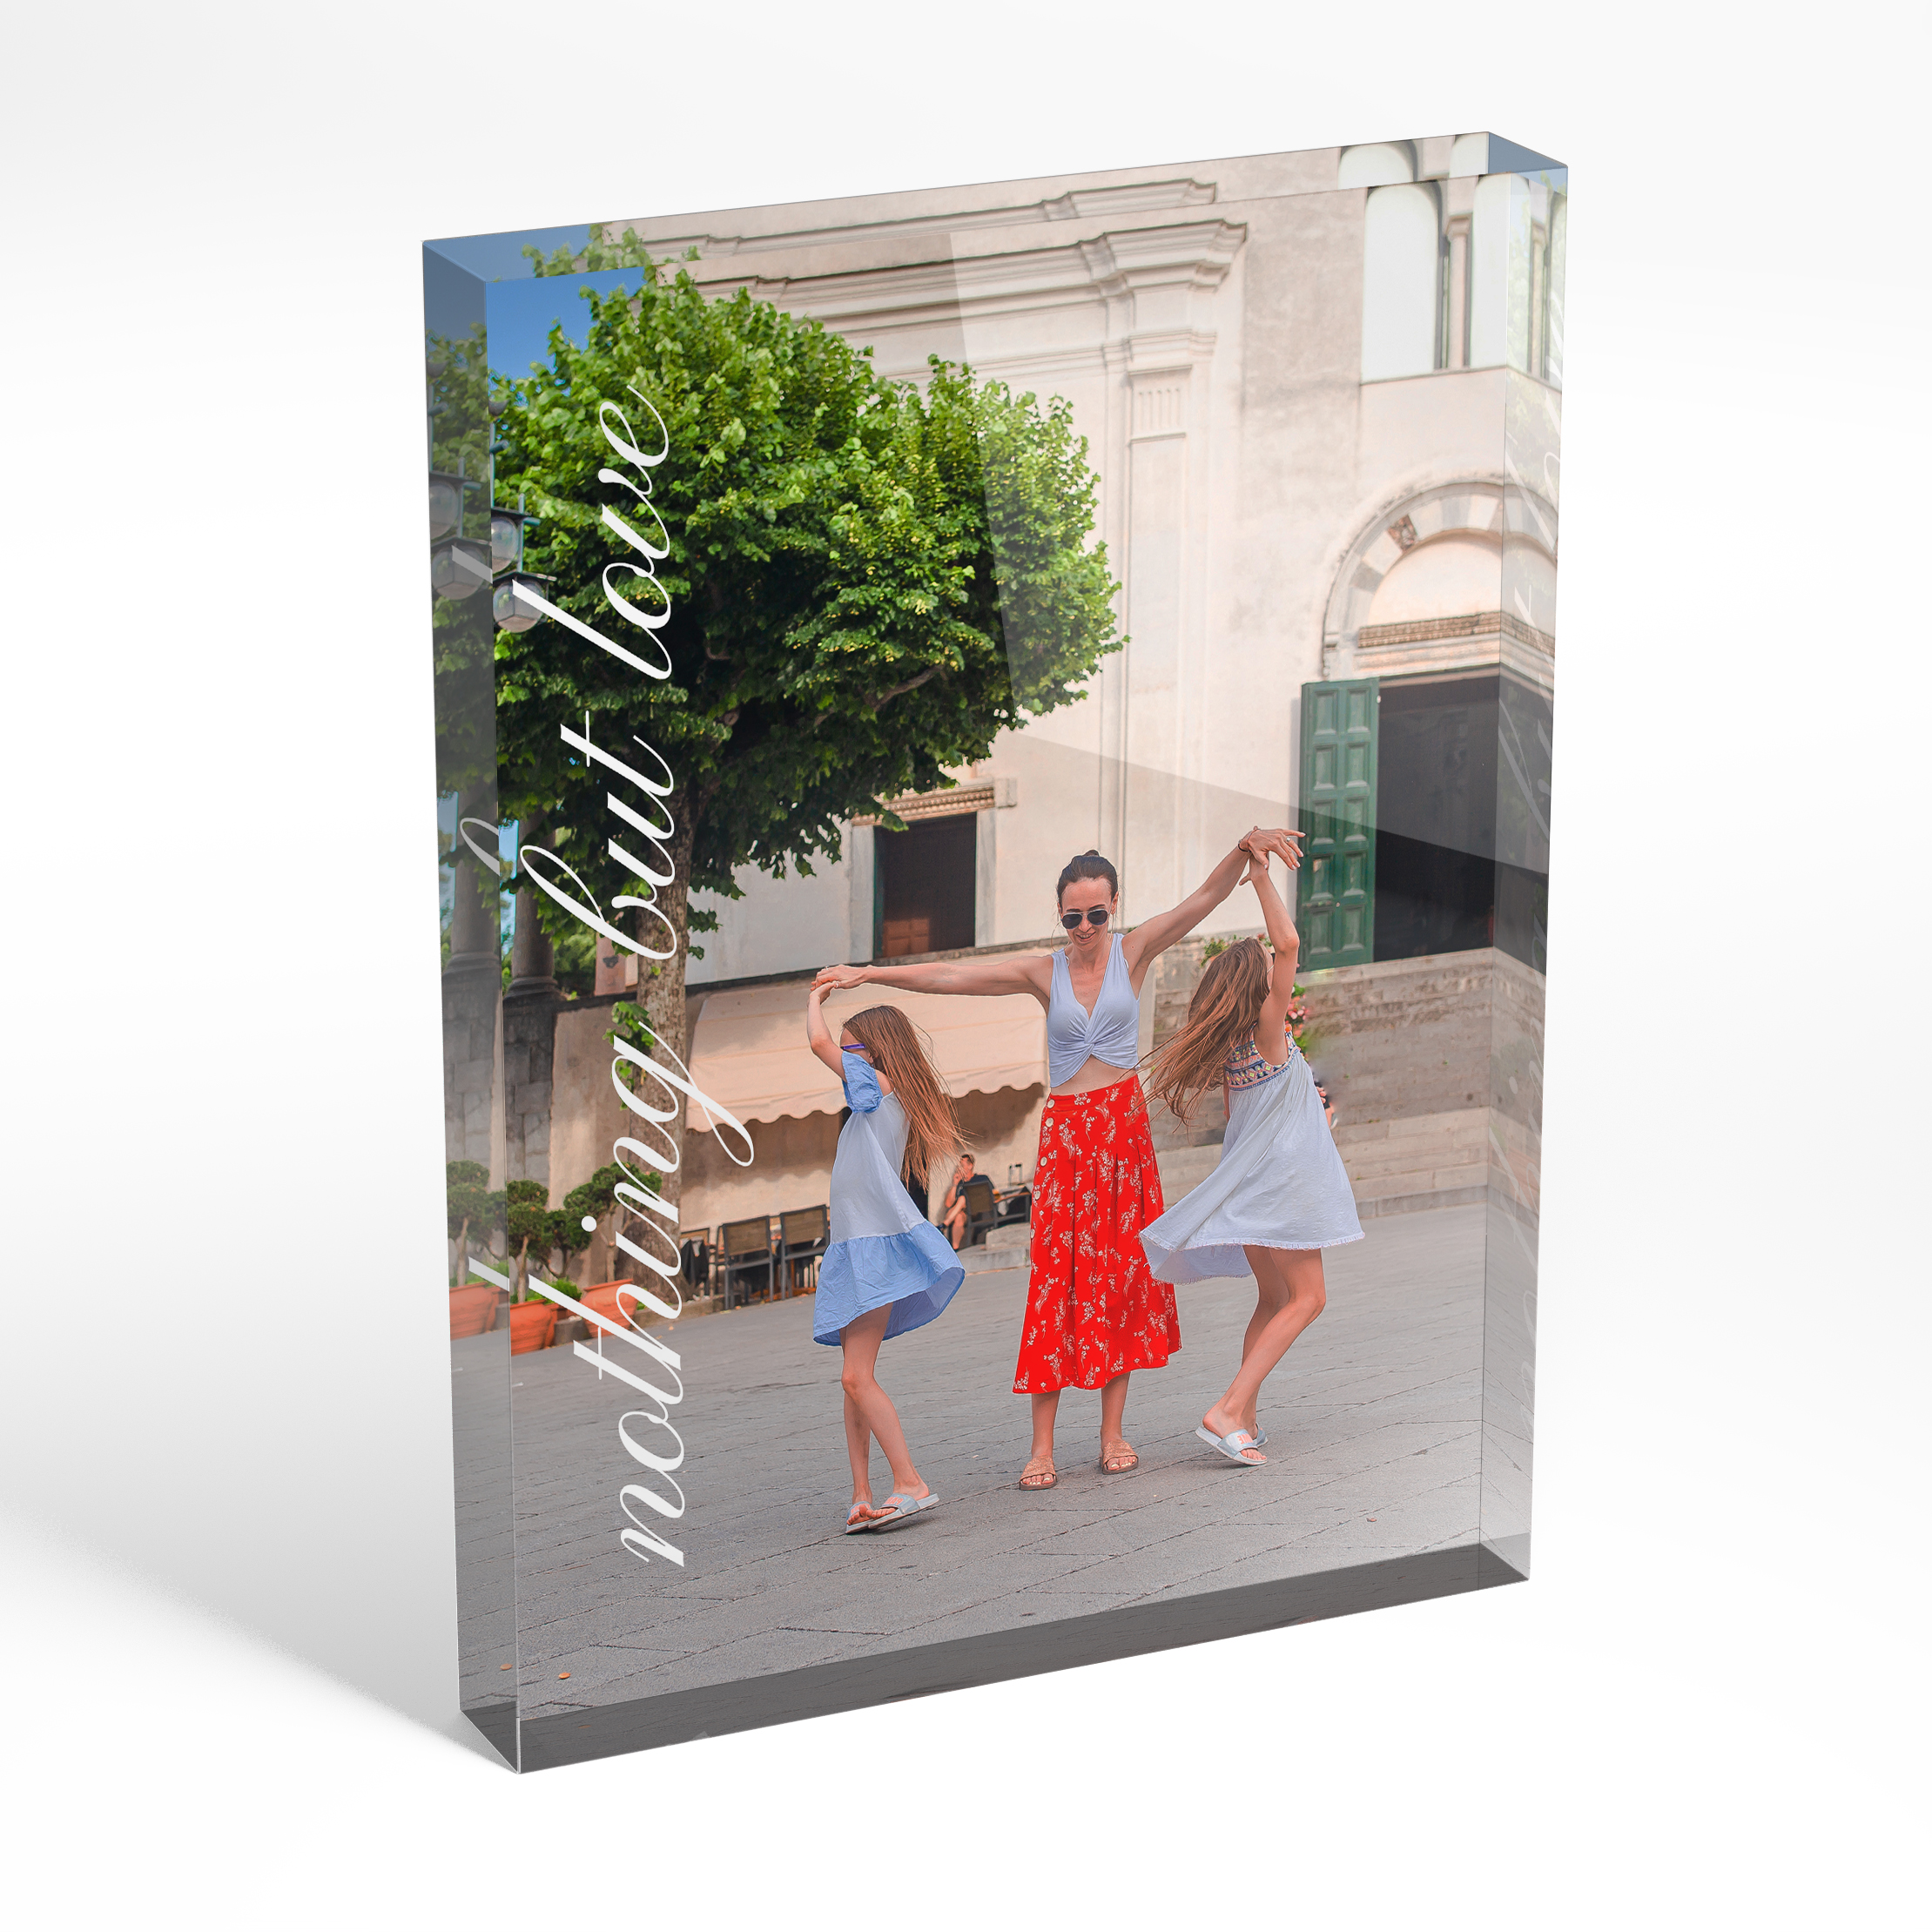 An angled side view of a portrait layout Acrylic Glass Photo Block with space for 1 photo. Thiis design is named "Nurturing Moments". 